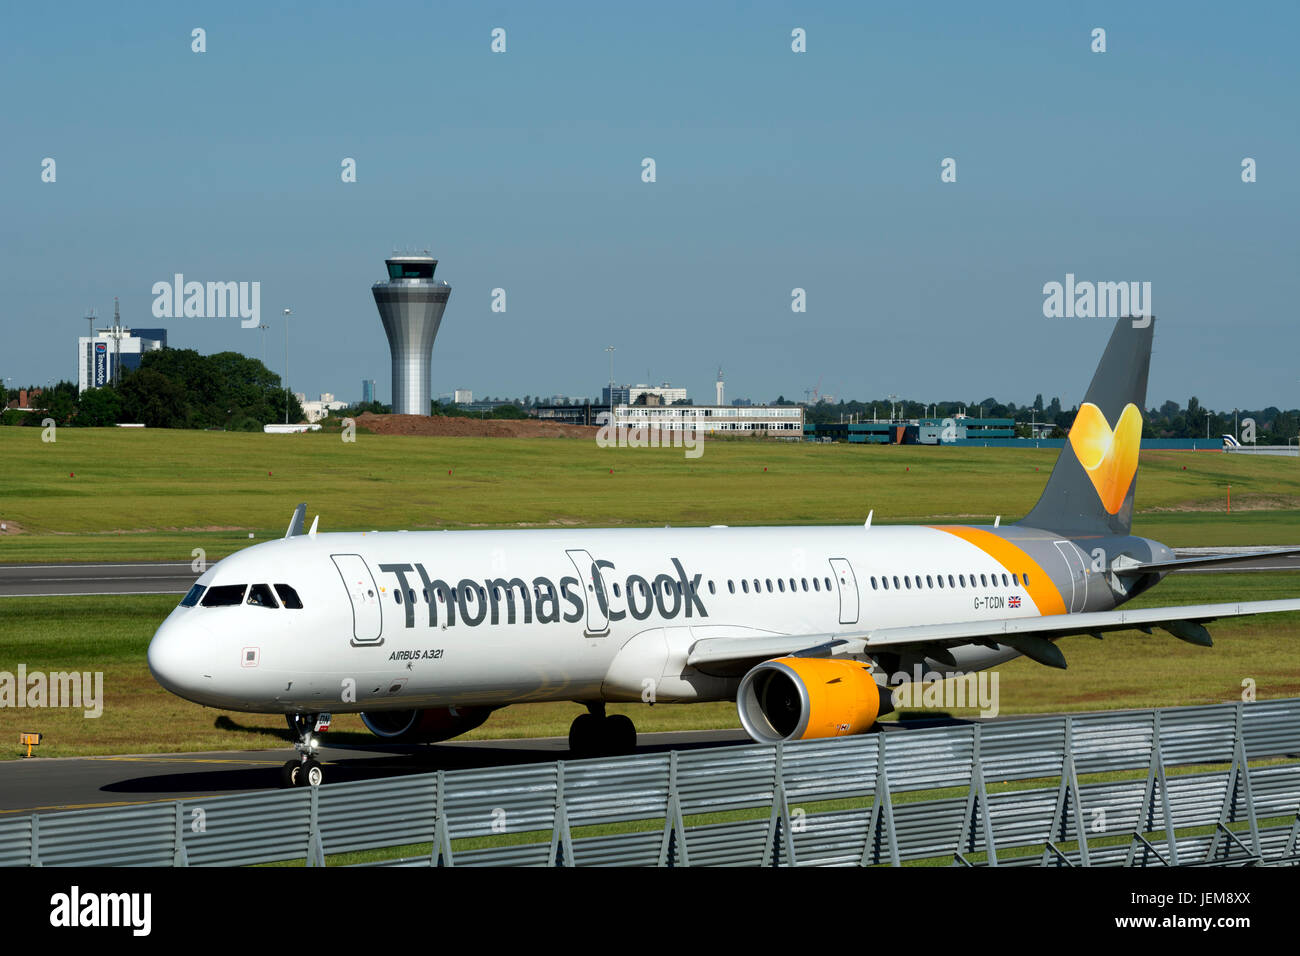 Thomas Cook Airbus A321 taxiing to depart from Birmingham Airport, UK (G-TCDN) Stock Photo